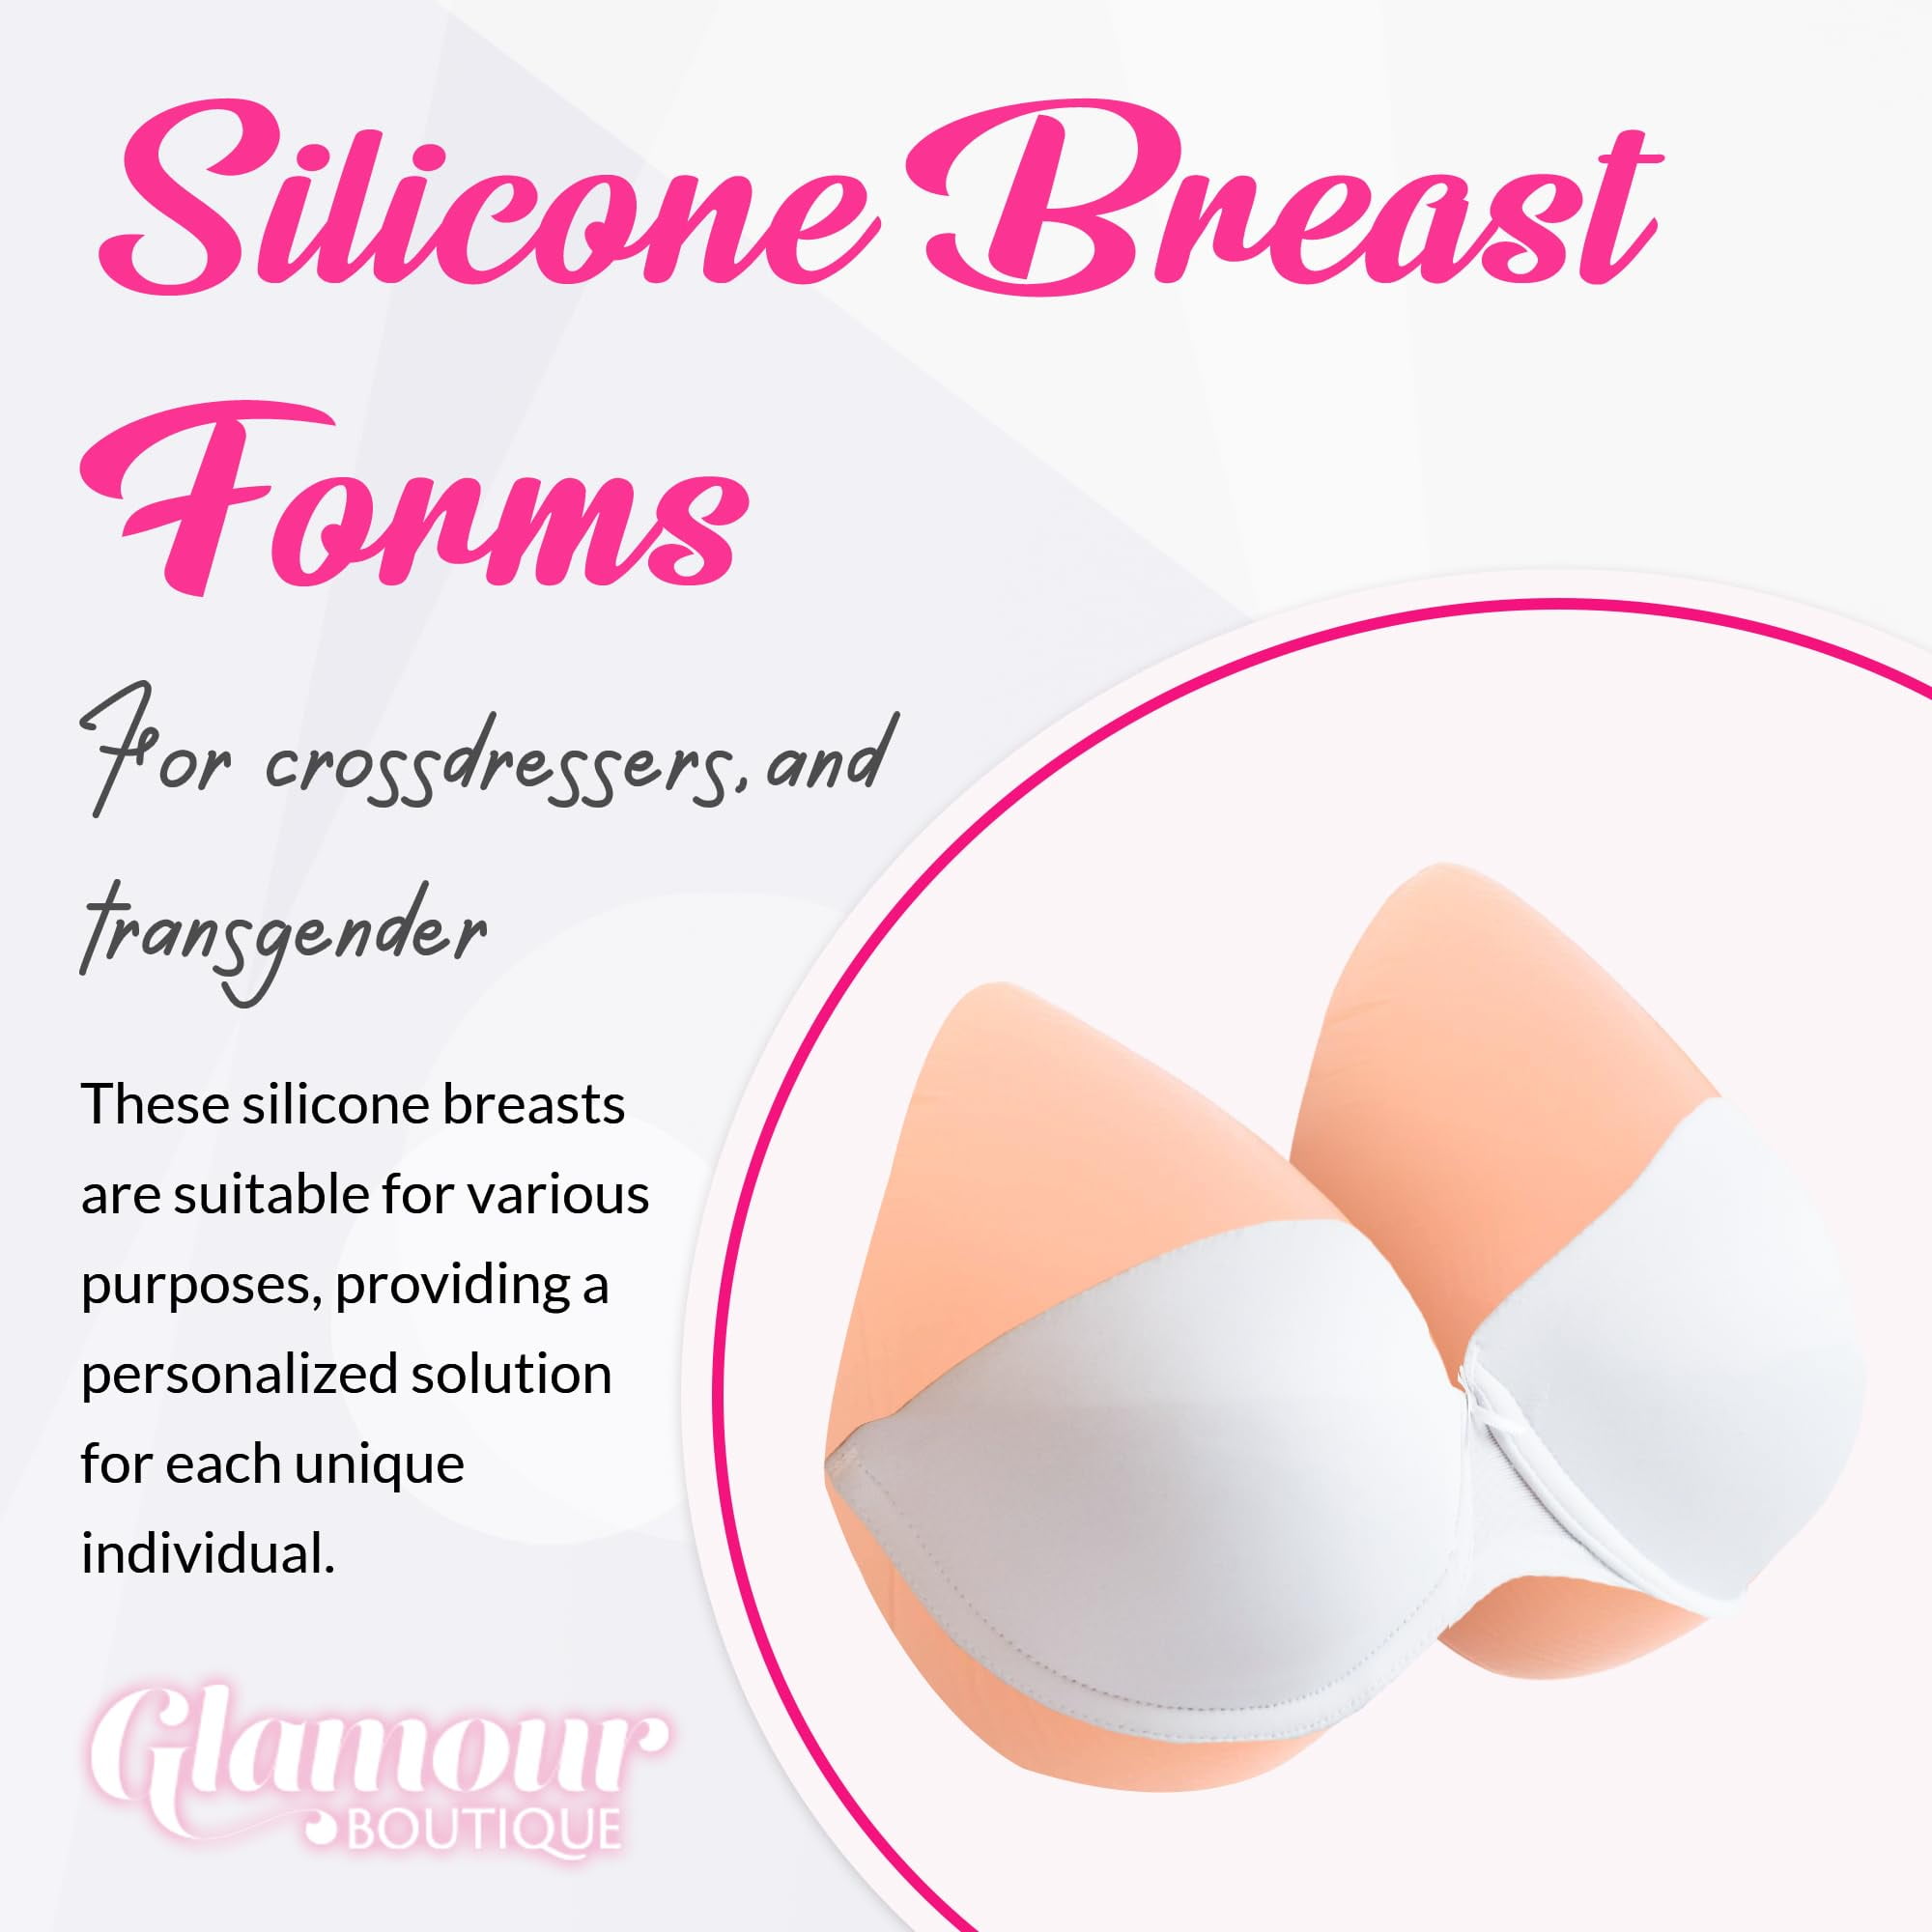 600g Silicone Breast Forms by FEMINIQUE Size 32D 34C 36B Size 5